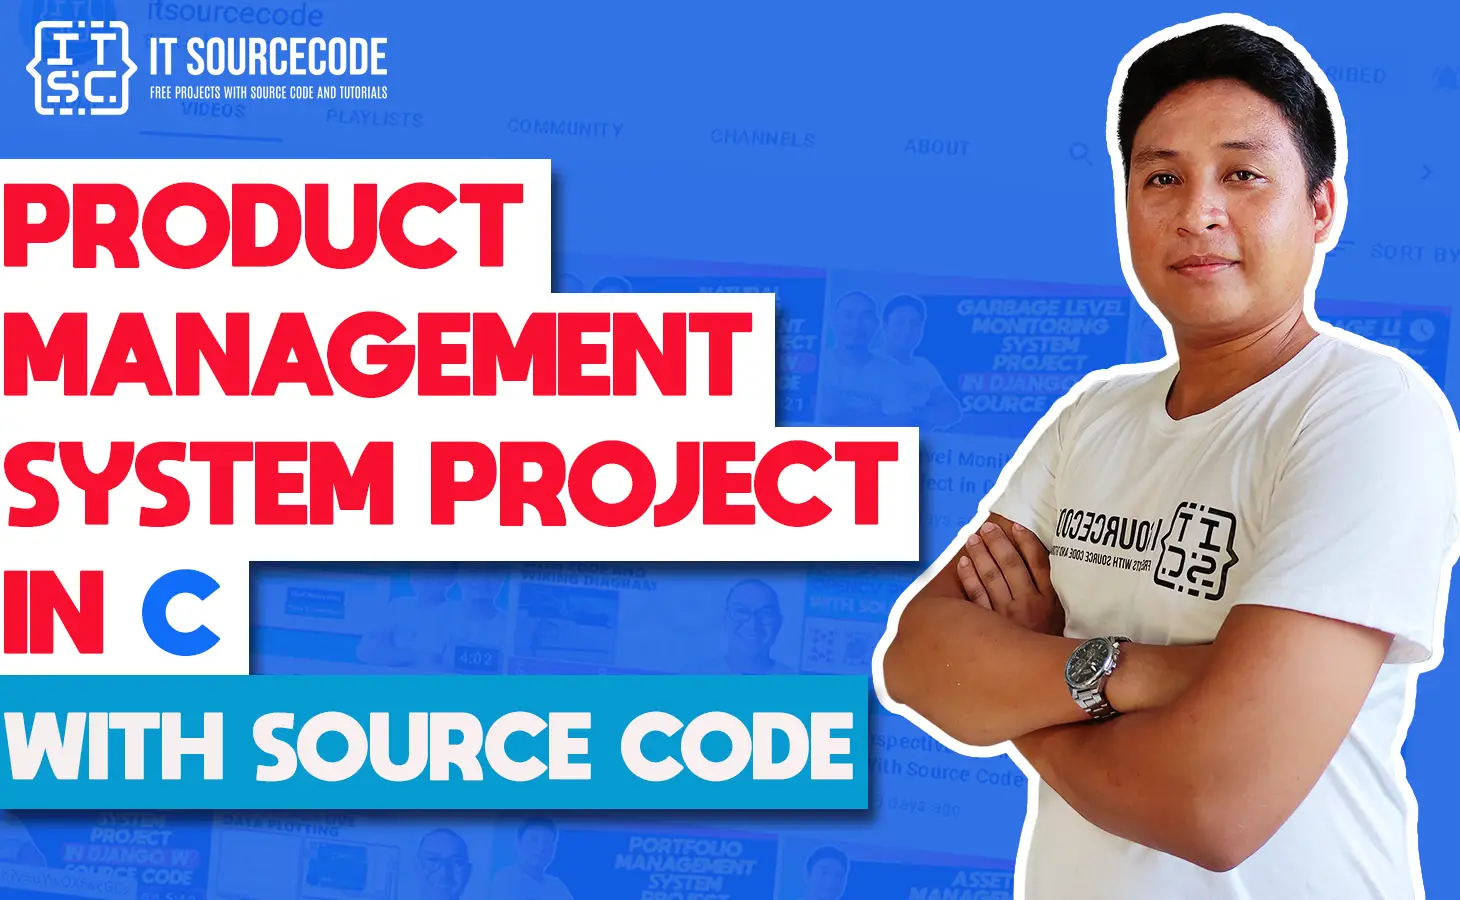 Product Management System Project in C with Source Code